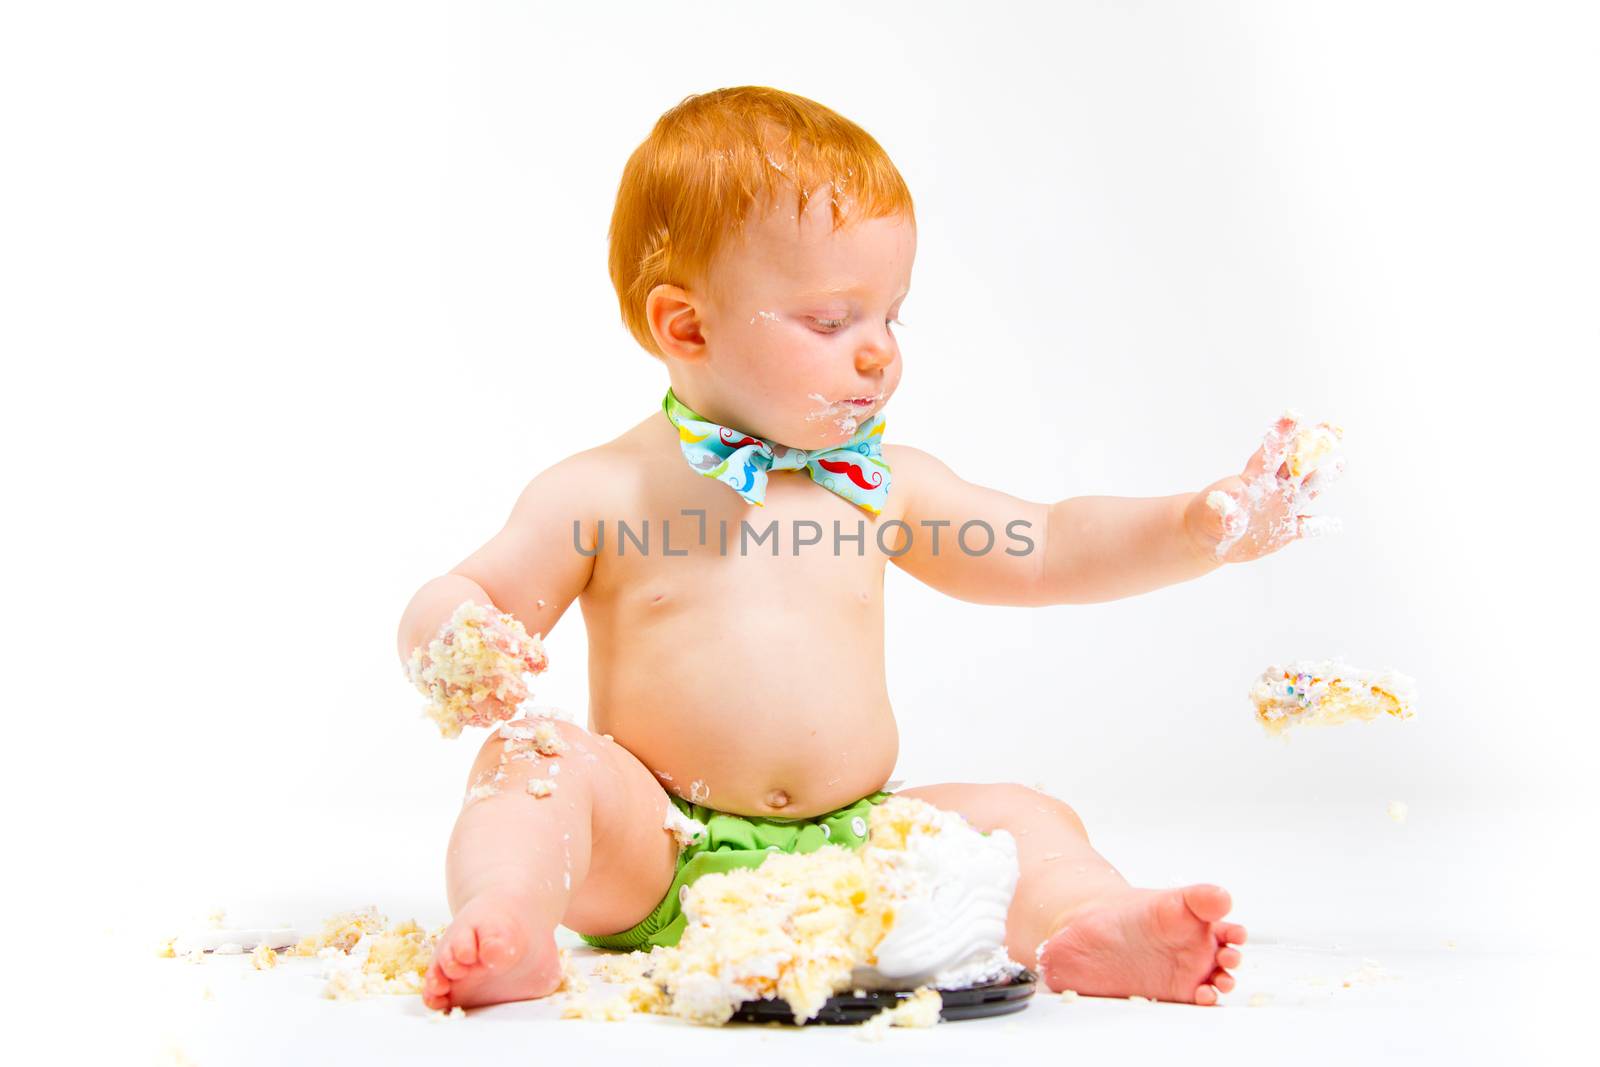 A baby boy gets to eat cake for the first time on his first birthday in this cake smash in studio against a white background.